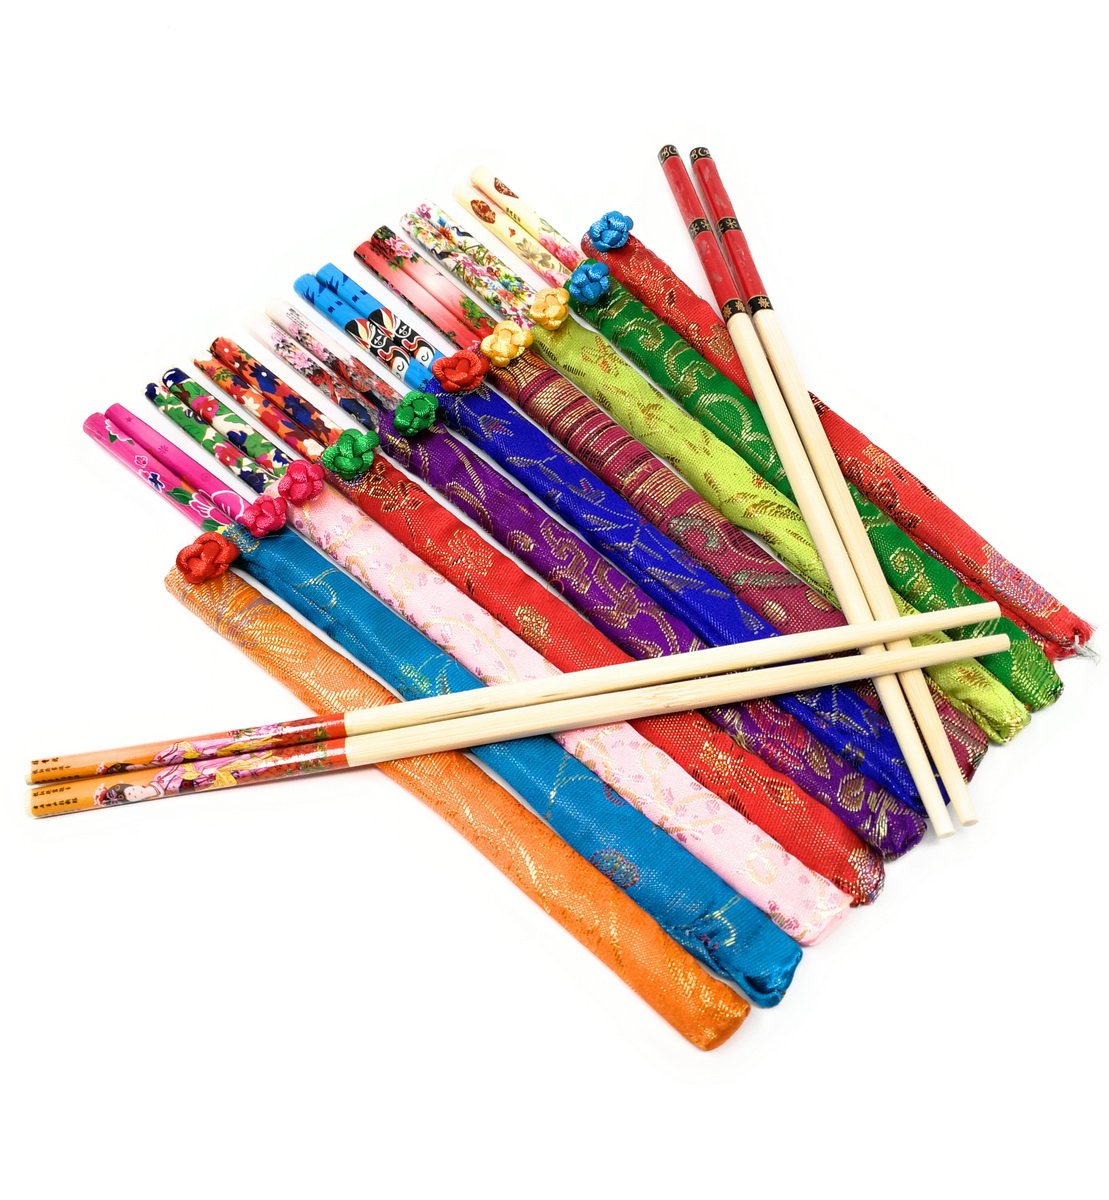 20 (10 pairs) Elegant Bamboo Chopsticks With Brocade Pouch by Asian Home [ Colors may vary ] .